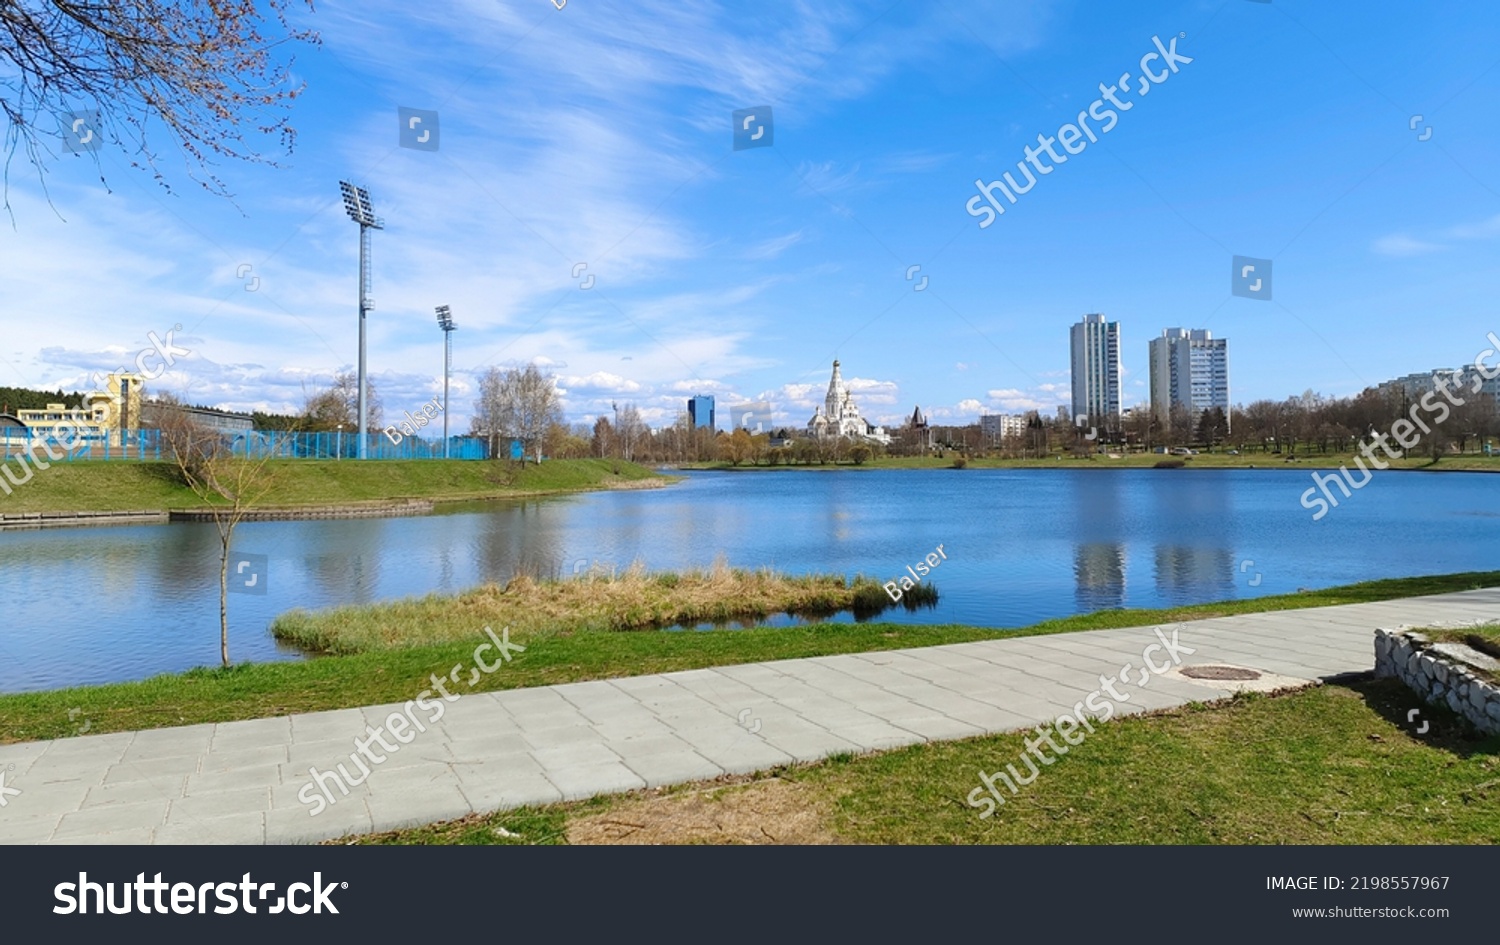 There are trees and grass on the shore of the lake. Along the shore is a paved sidewalk. On the opposite shore is a stadium with lighting poles, an Orthodox church and apartment buildings. Sunny #2198557967